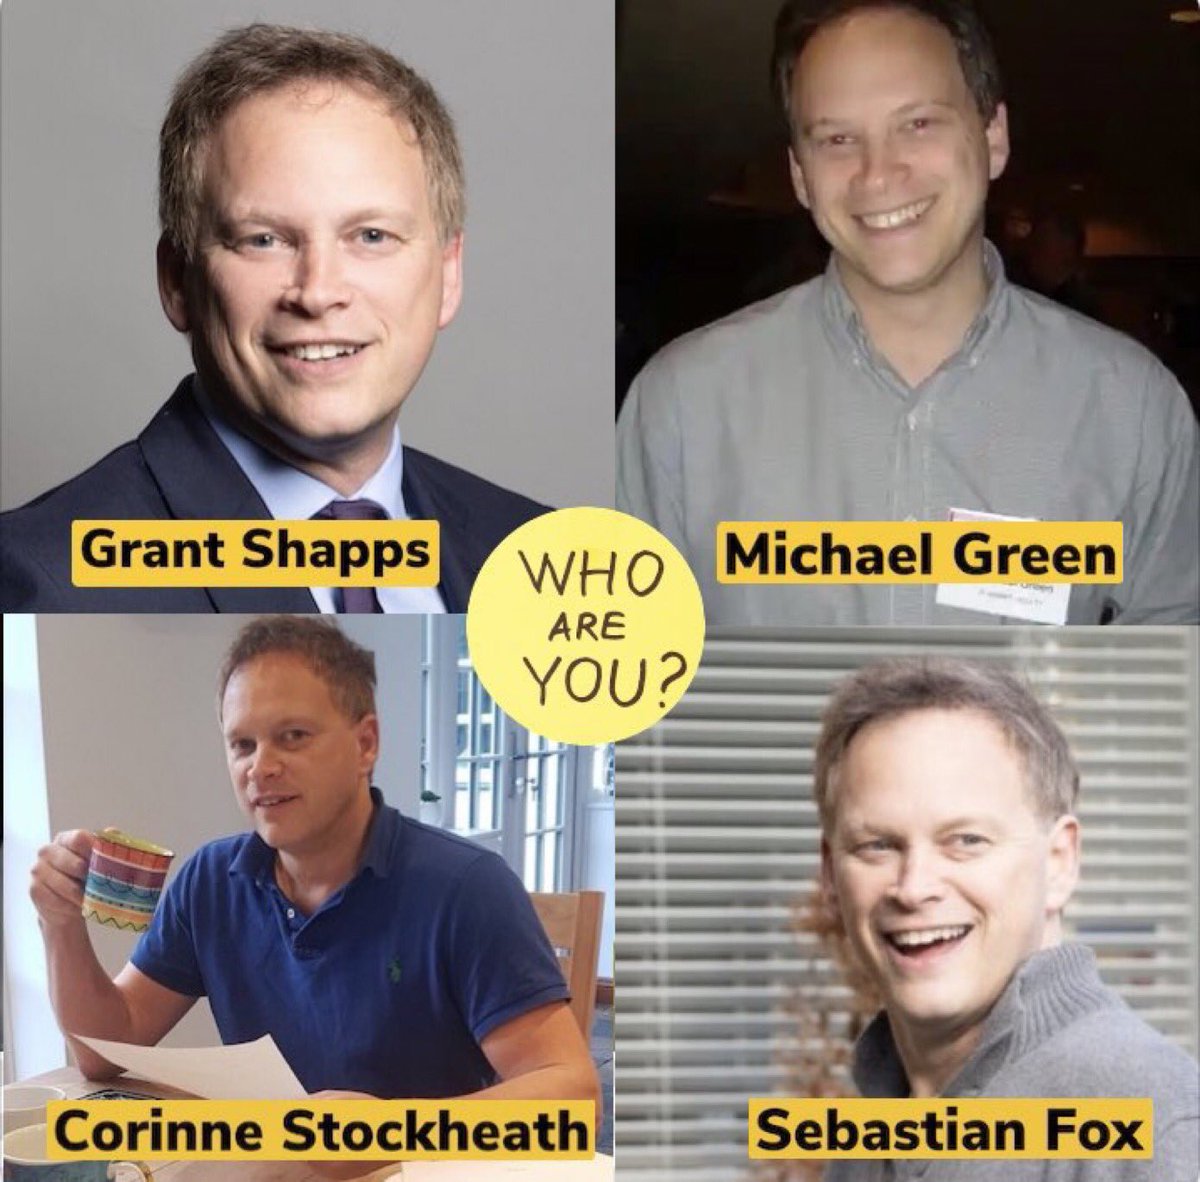 A Government whose Defence Secretary has four aliases are about to argue that the country is safer under the Conservatives. Yeah right!!!! 😂 #GrantShapps #SebastianFox #MichaelGreen #CorinneStockheath